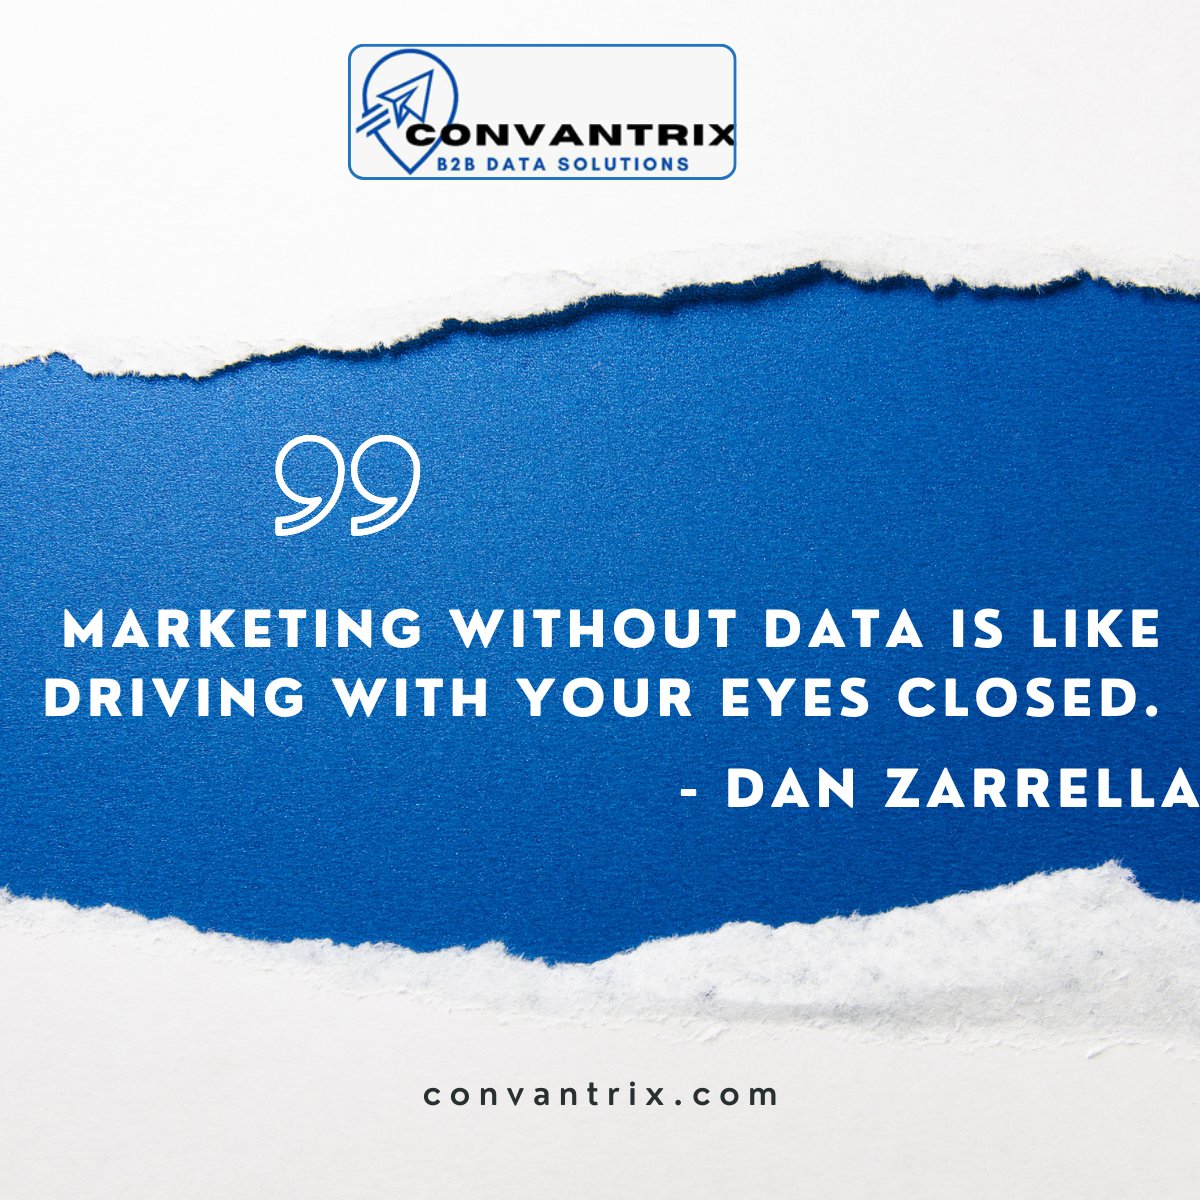 See clearly, market confidently. Convantrix data helps in every move in Marketing your products and services.

#Mondayvibes #Mondaymotivation #Quotes #Quoteoftheday #Mondayquote #B2bleads #B2bemaillist #Leadgenration #emailmarketingtips #emailcampaigns #b2bleadgeneration